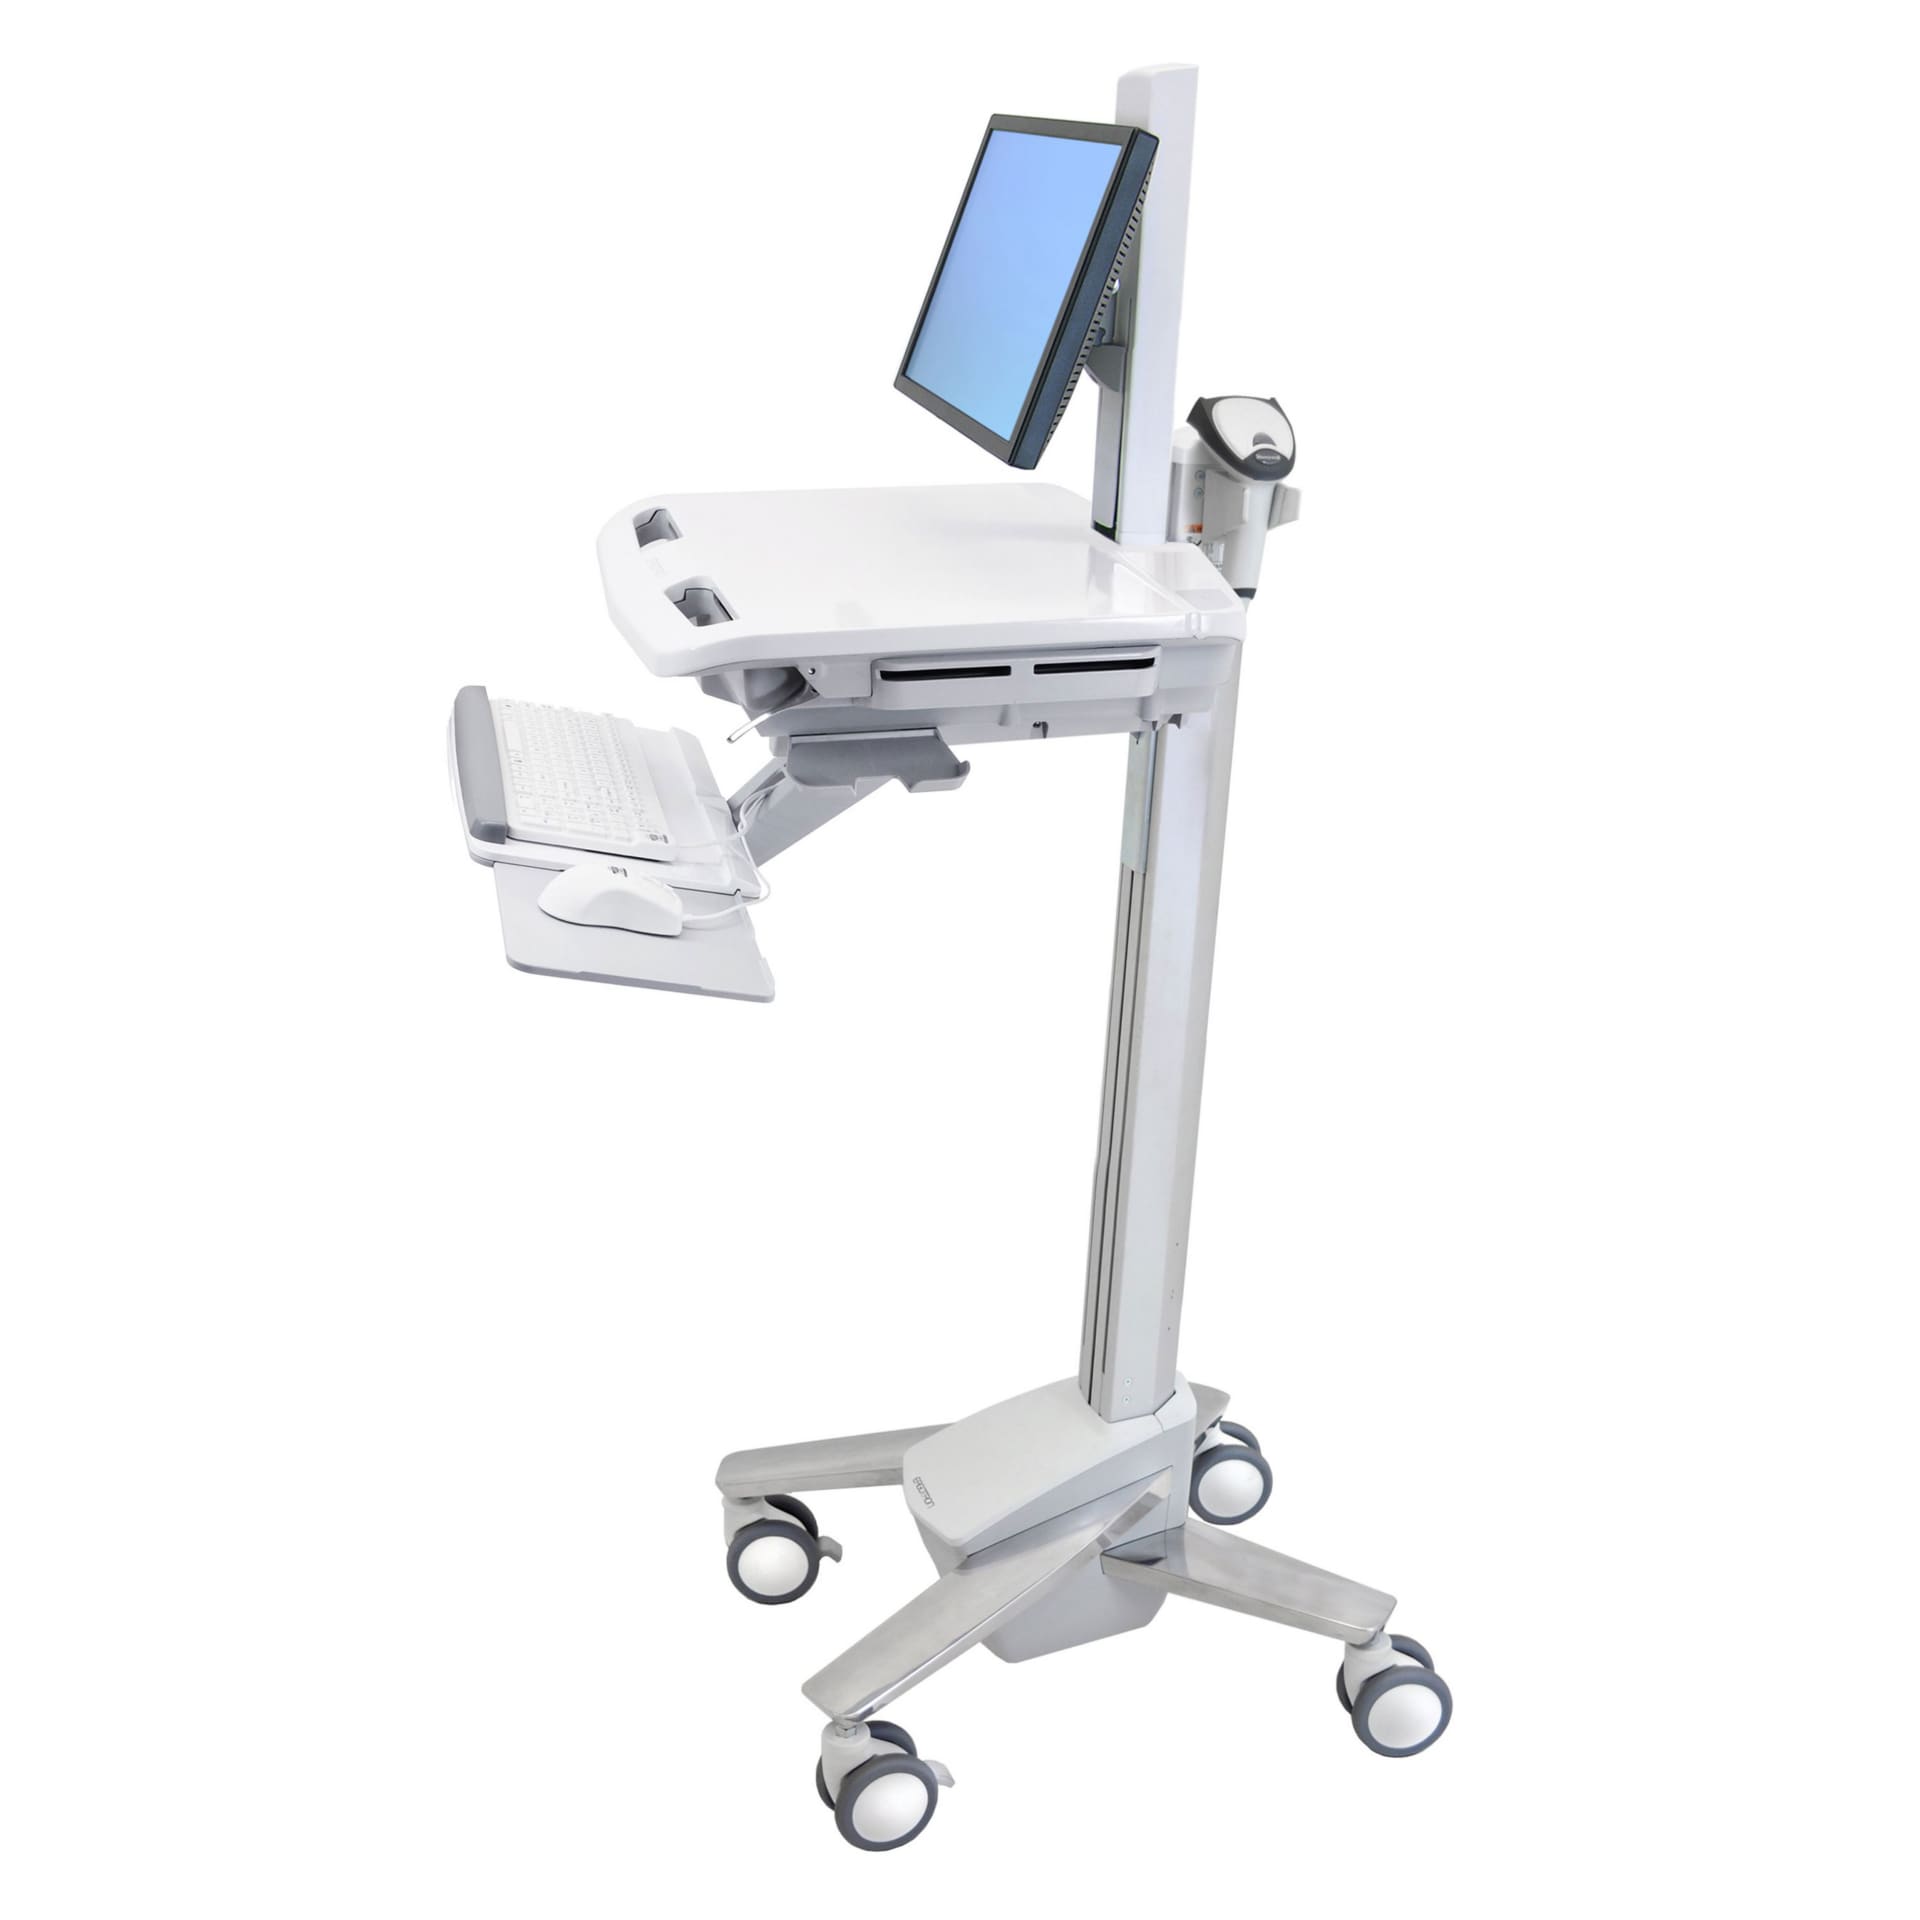 Cybernet Ergotron SV40 StyleView Cart with LCD Pivot